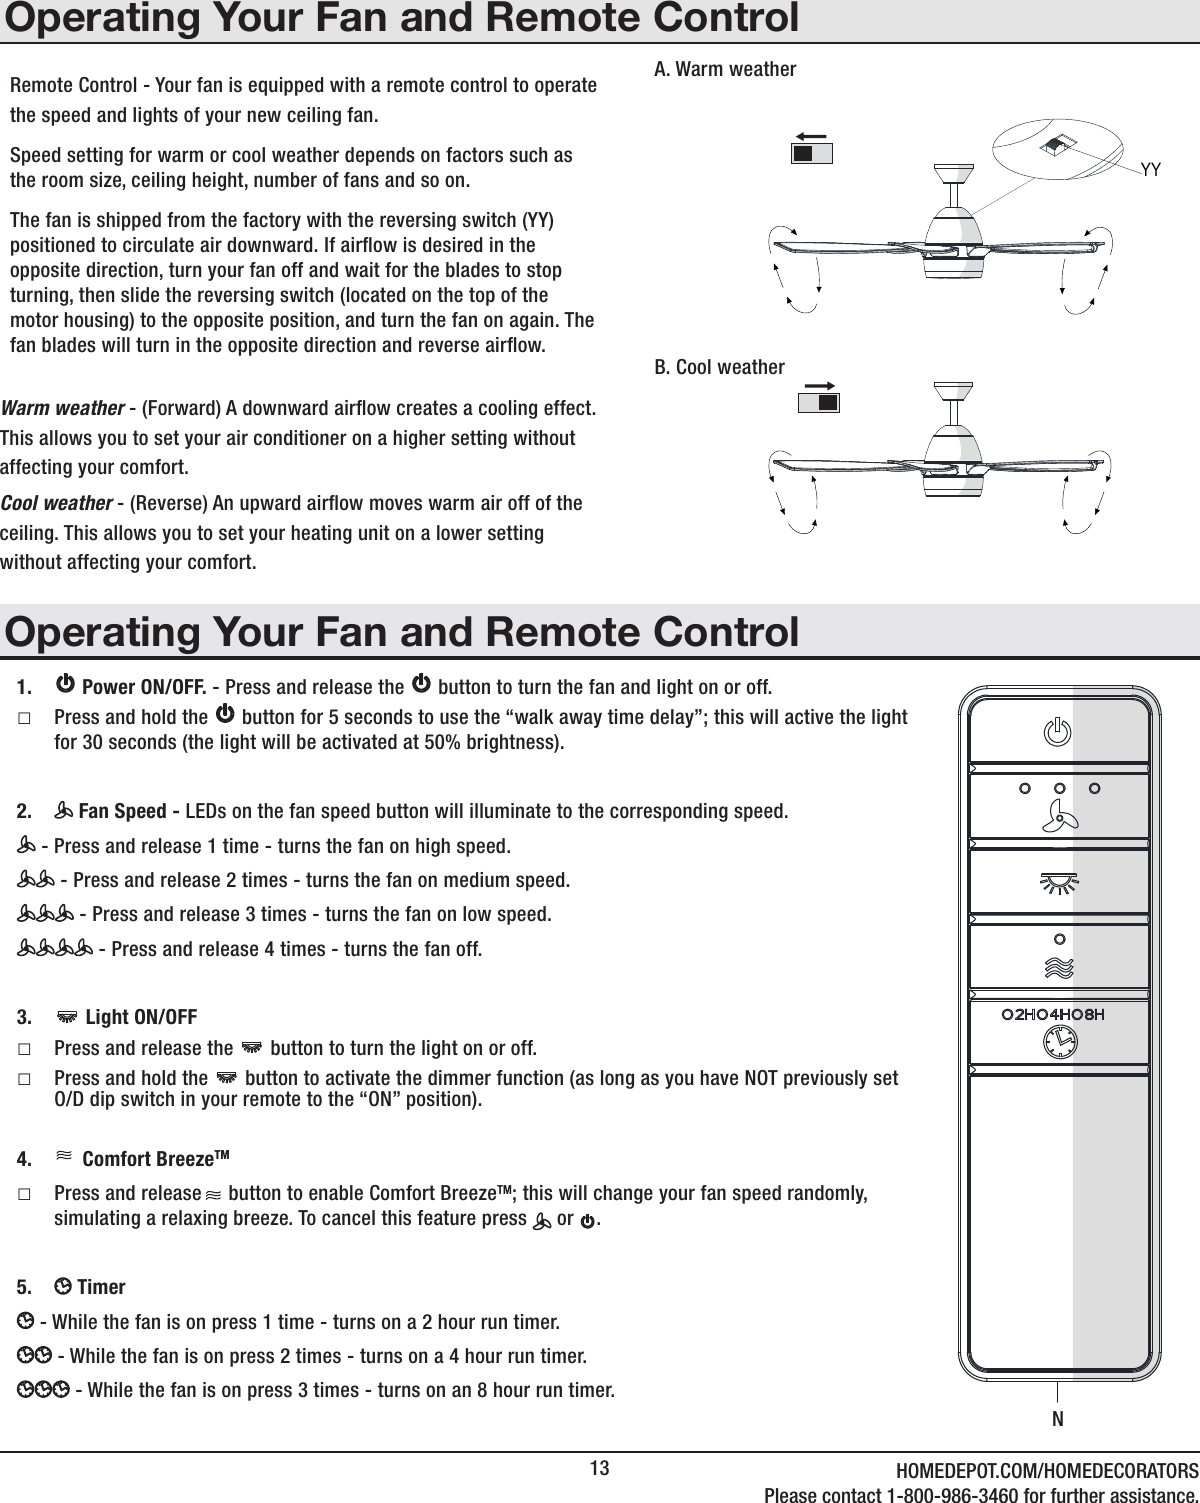 13 HOMEDEPOT.COM/HOMEDECORATORSPlease contact 1-800-986-3460 for further assistance.Operating Your Fan and Remote ControlRemote Control - Your fan is equipped with a remote control to operatethe speed and lights of your new ceiling fan. Speed setting for warm or cool weather depends on factors such as the room size, ceiling height, number of fans and so on.The fan is shipped from the factory with the reversing switch (YY) positioned to circulate air downward. If airow is desired in the opposite direction, turn your fan off and wait for the blades to stop turning, then slide the reversing switch (located on the top of the motor housing) to the opposite position, and turn the fan on again. The fan blades will turn in the opposite direction and reverse airow.Warm weather - (Forward) A downward airow creates a cooling effect.This allows you to set your air conditioner on a higher setting withoutaffecting your comfort.Cool weather - (Reverse) An upward airow moves warm air off of theceiling. This allows you to set your heating unit on a lower settingwithout affecting your comfort.A. Warm weatherB. Cool weather1.    Power ON/OFF. - Press and release the   button to turn the fan and light on or off. □Press and hold the   button for 5 seconds to use the “walk away time delay”; this will active the light for 30 seconds (the light will be activated at 50% brightness).2.   Fan Speed - LEDs on the fan speed button will illuminate to the corresponding speed. - Press and release 1 time - turns the fan on high speed. - Press and release 2 times - turns the fan on medium speed. - Press and release 3 times - turns the fan on low speed. - Press and release 4 times - turns the fan off.3.    Light ON/OFF  □Press and release the   button to turn the light on or off. □Press and hold the   button to activate the dimmer function (as long as you have NOT previously set O/D dip switch in your remote to the “ON” position).4.   Comfort BreezeTM  □Press and release     button to enable Comfort BreezeTM; this will change your fan speed randomly, simulating a relaxing breeze. To cancel this feature press   or  .5.   Timer   - While the fan is on press 1 time - turns on a 2 hour run timer. - While the fan is on press 2 times - turns on a 4 hour run timer. - While the fan is on press 3 times - turns on an 8 hour run timer.Operating Your Fan and Remote ControlNYY